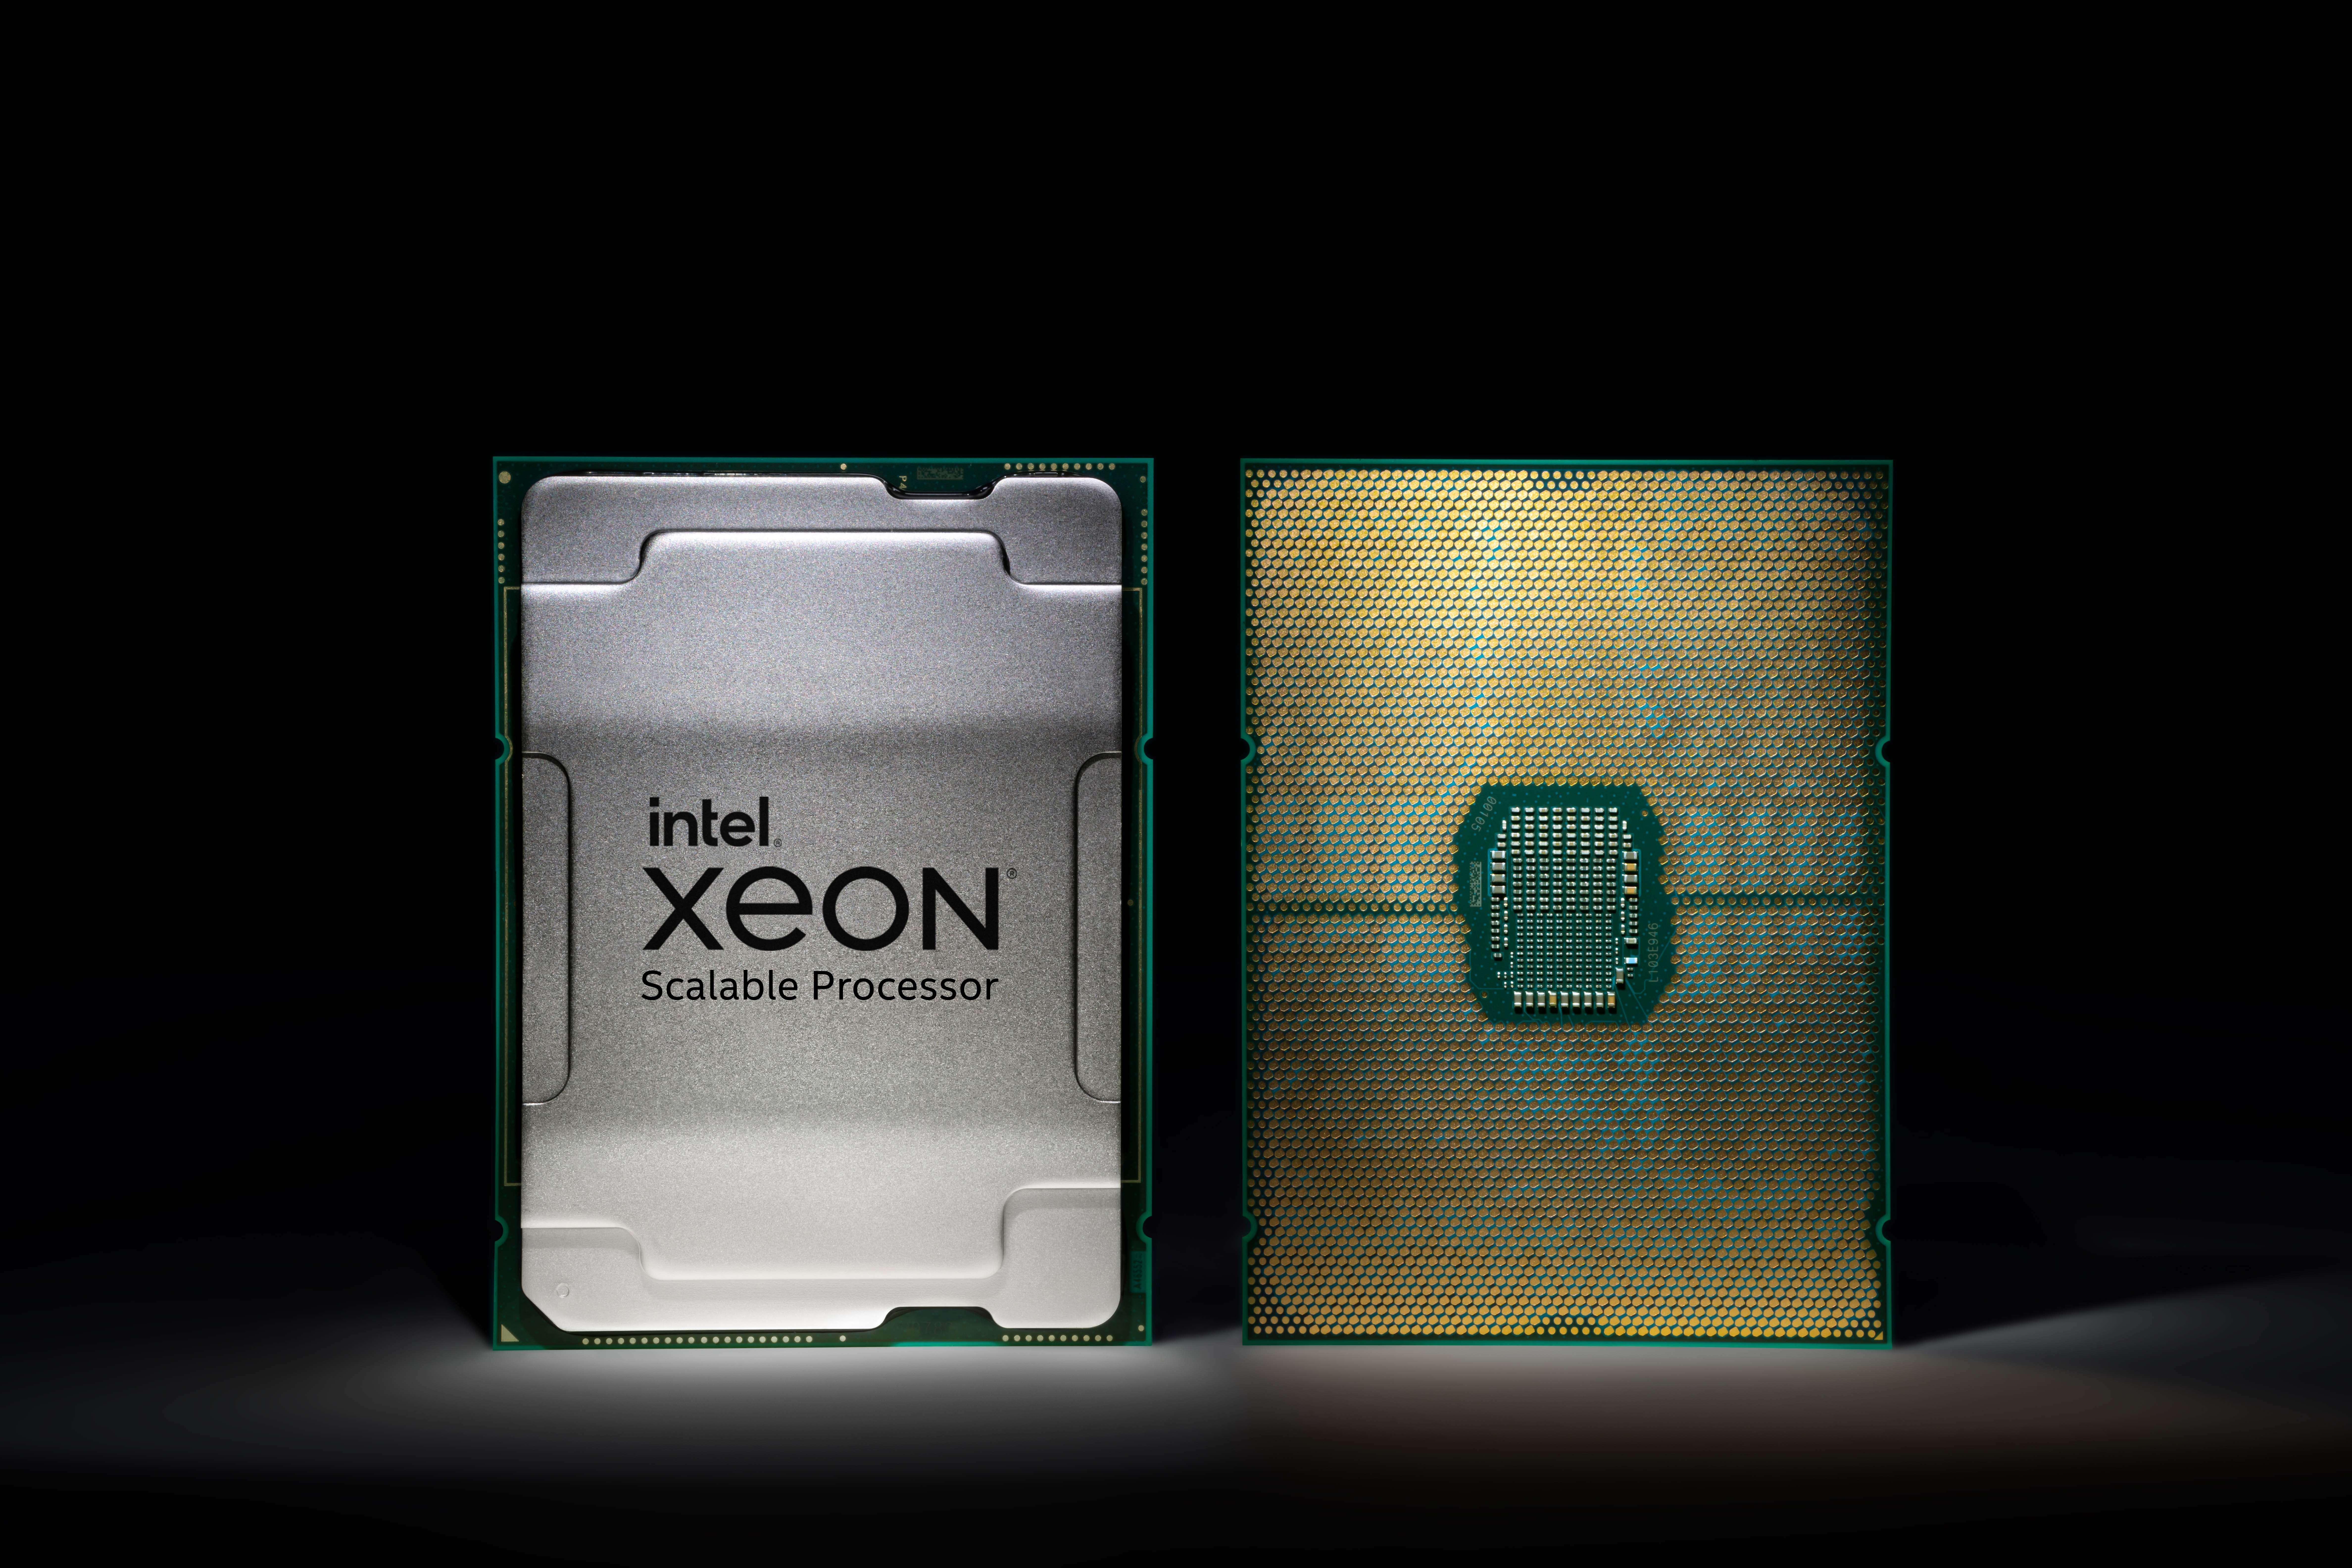 Intel Ice Lake Xeon Platinum 8380 Review: 10nm Debuts for Data Center | Tom's Hardware